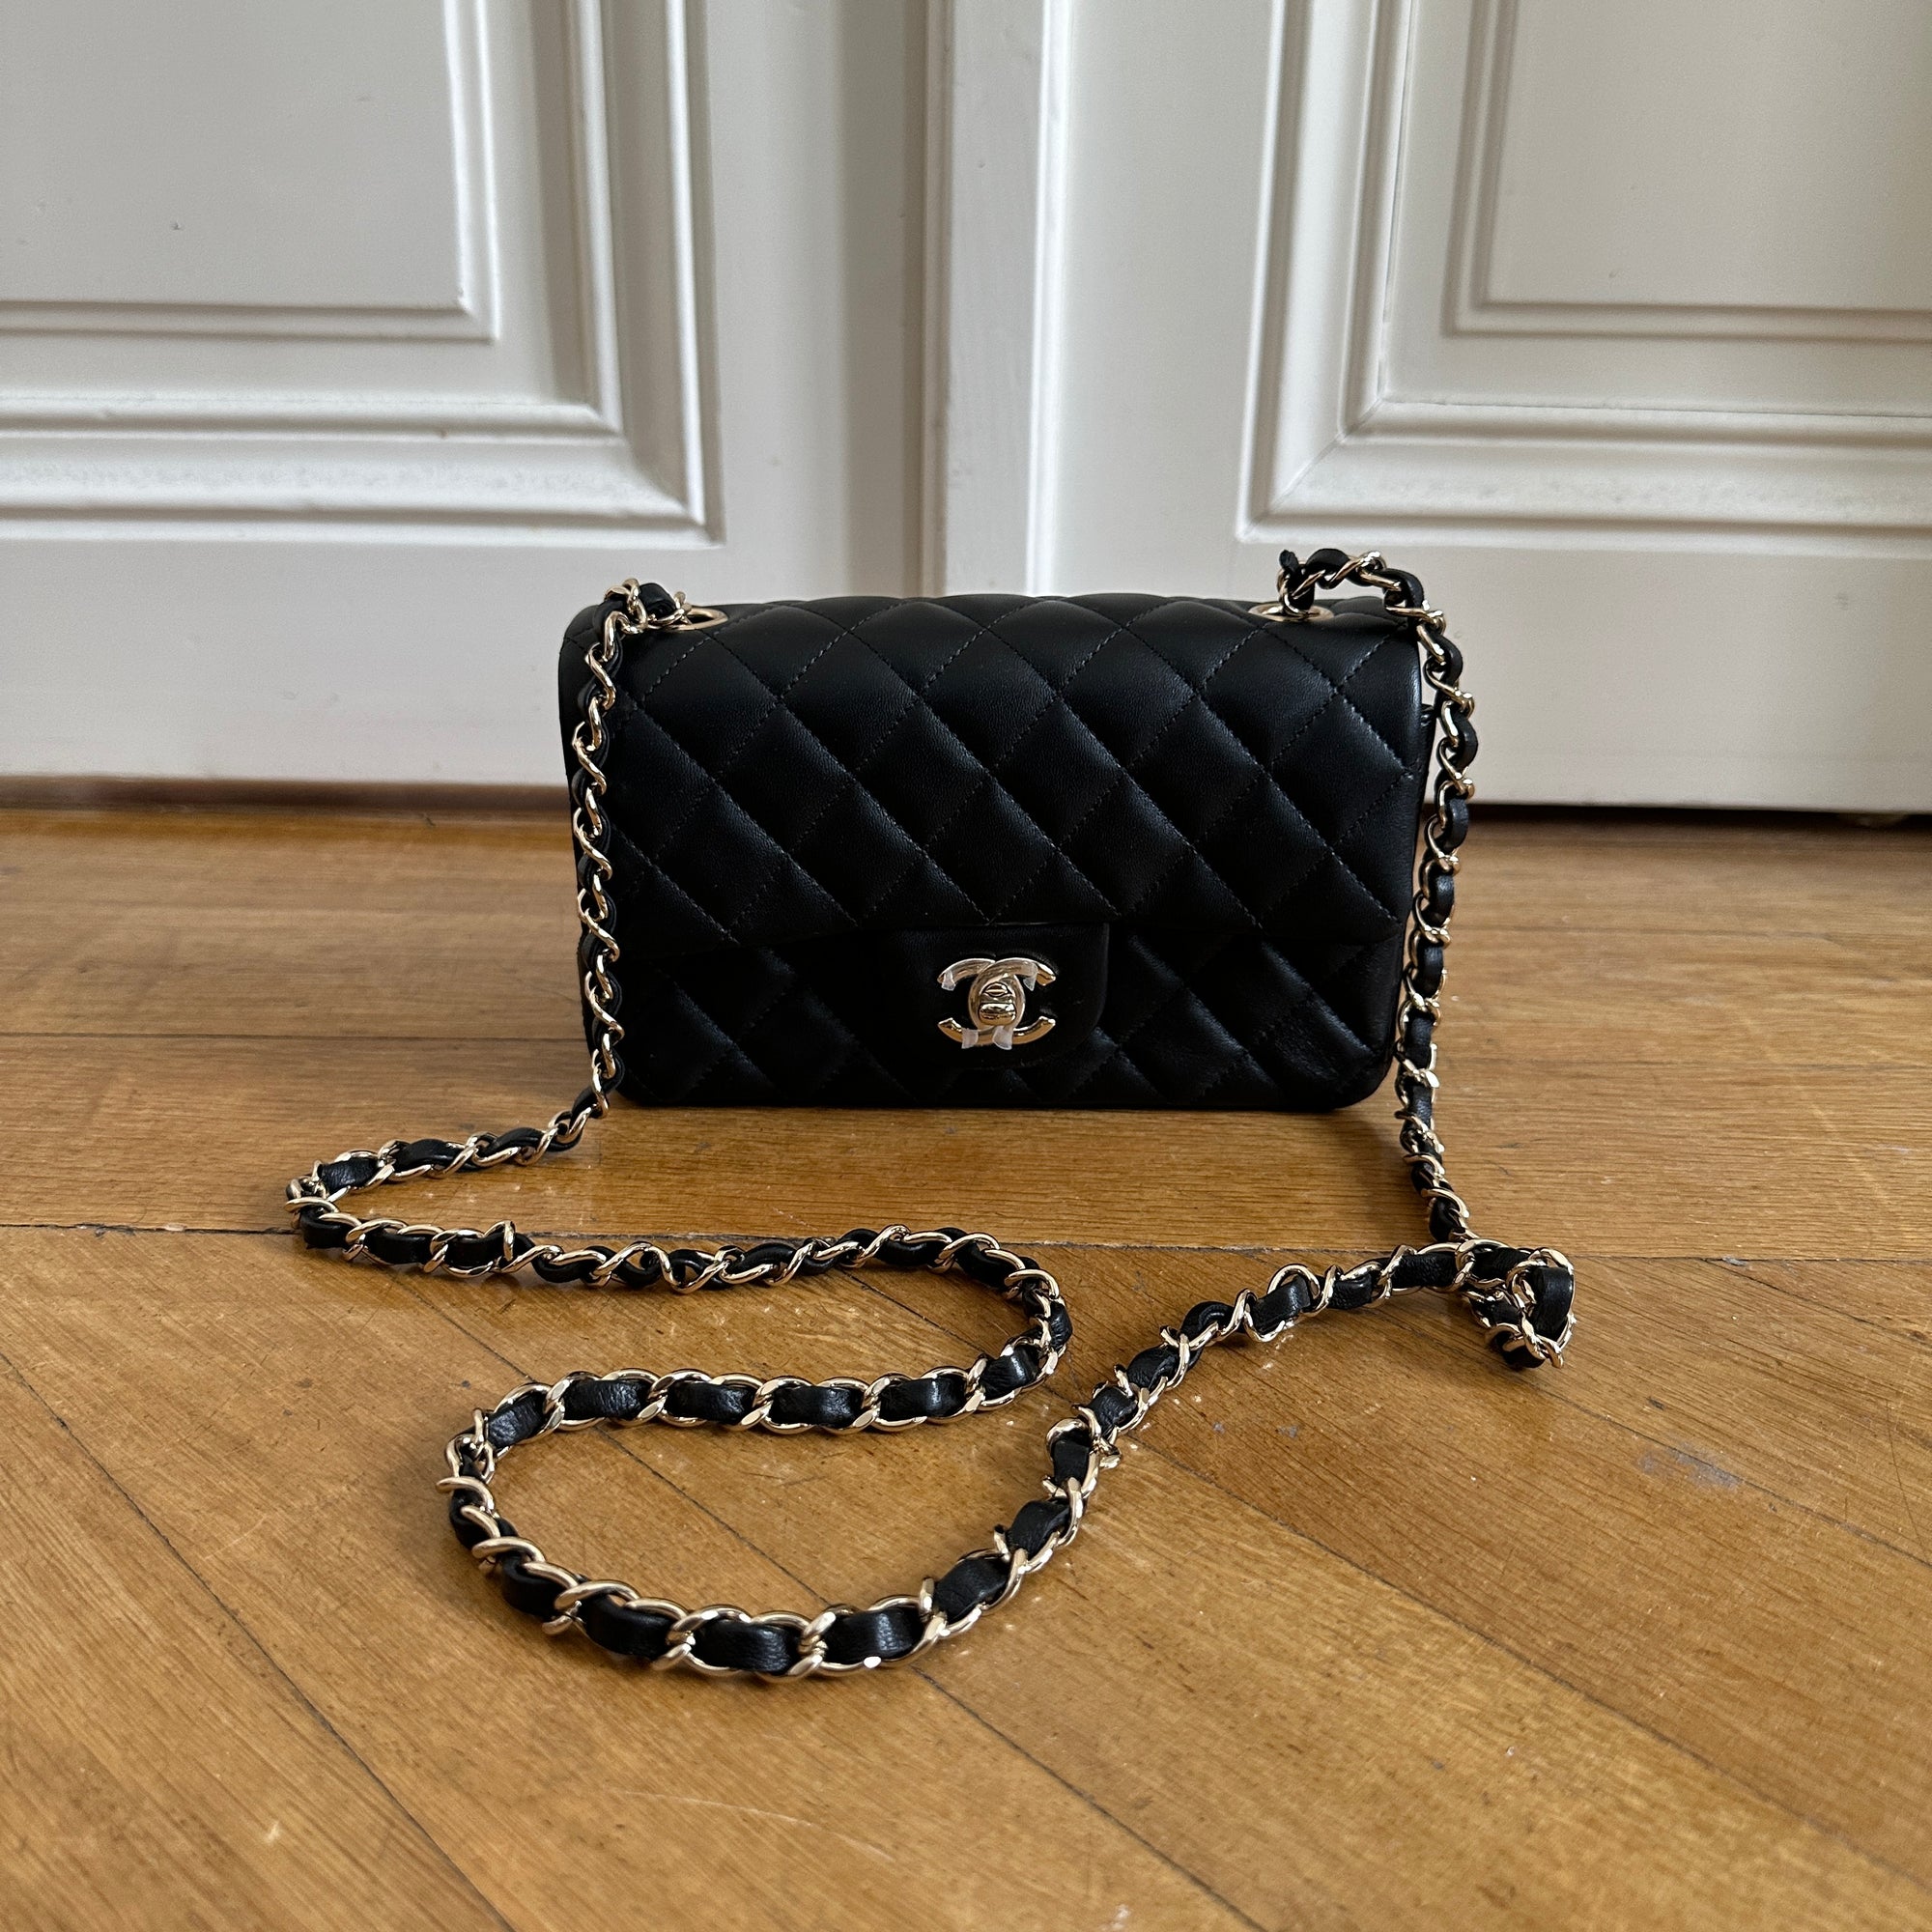 Chanel Classic Black New Mini Flap Bag Quilted Lambskin